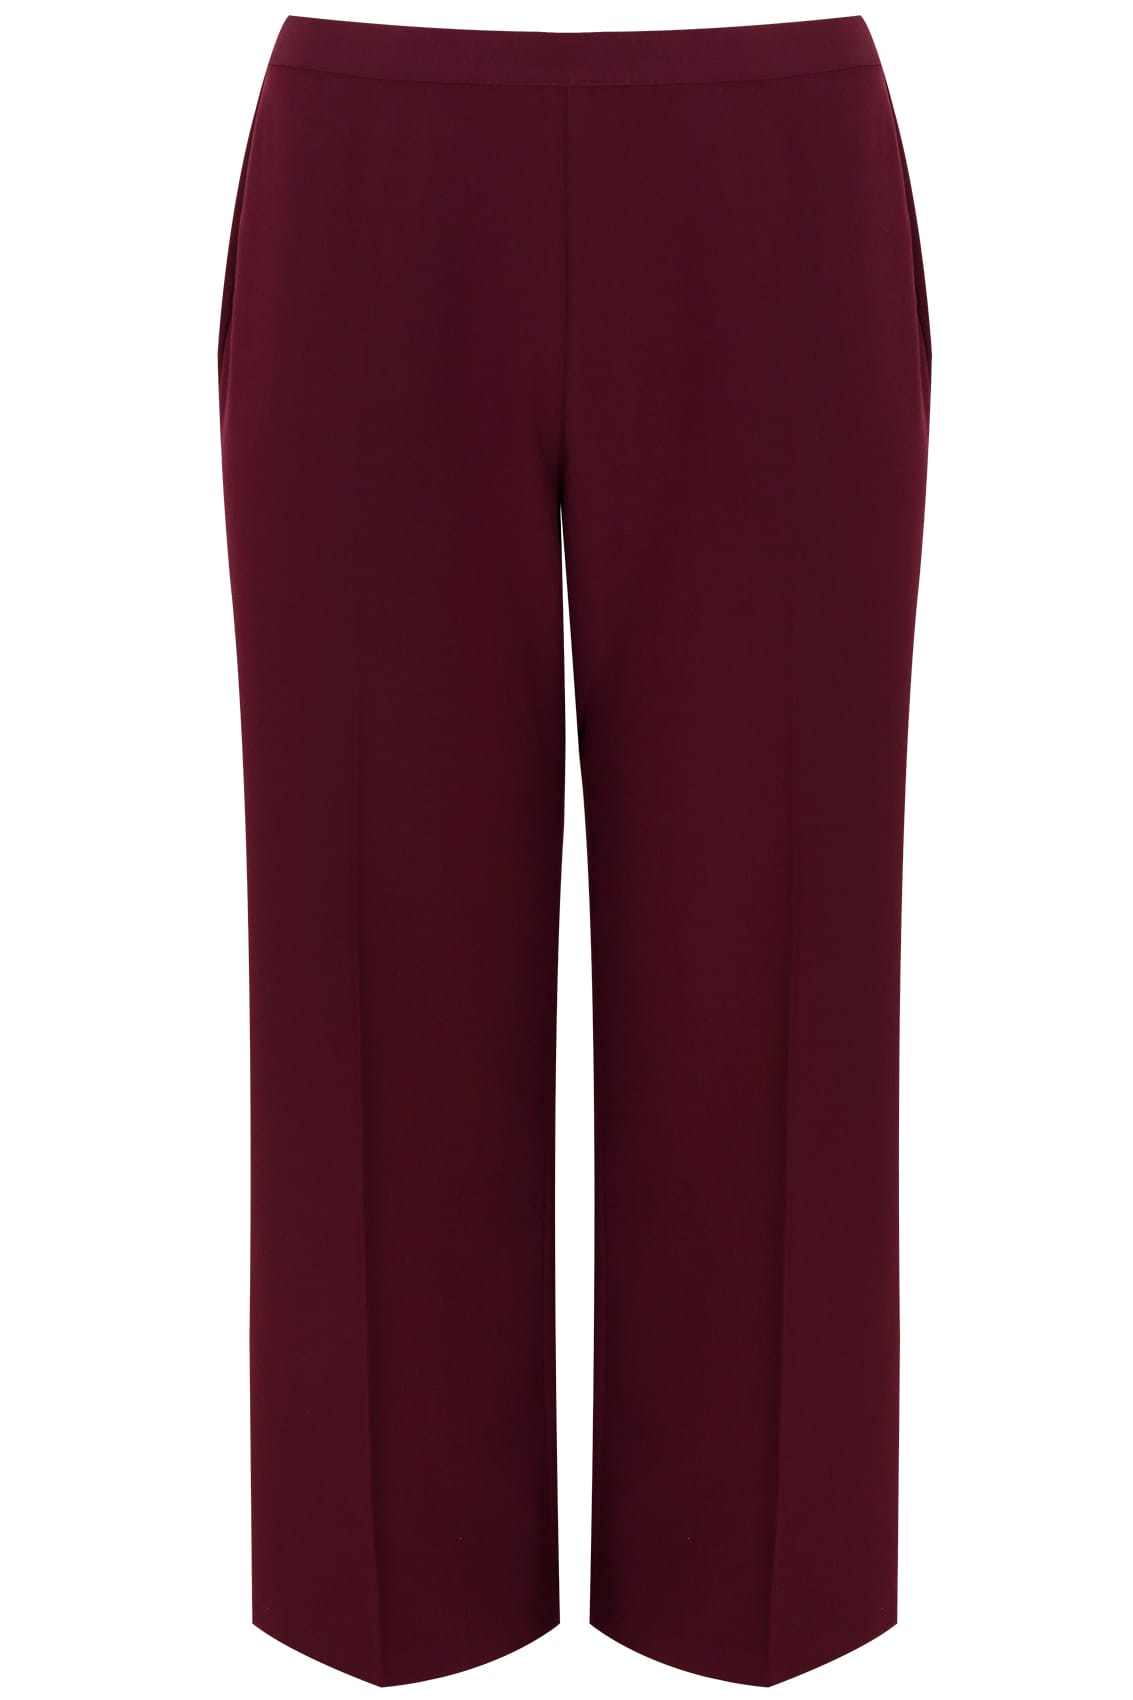 Burgundy Classic Straight Leg Trousers With Elasticated Waistband, Plus ...